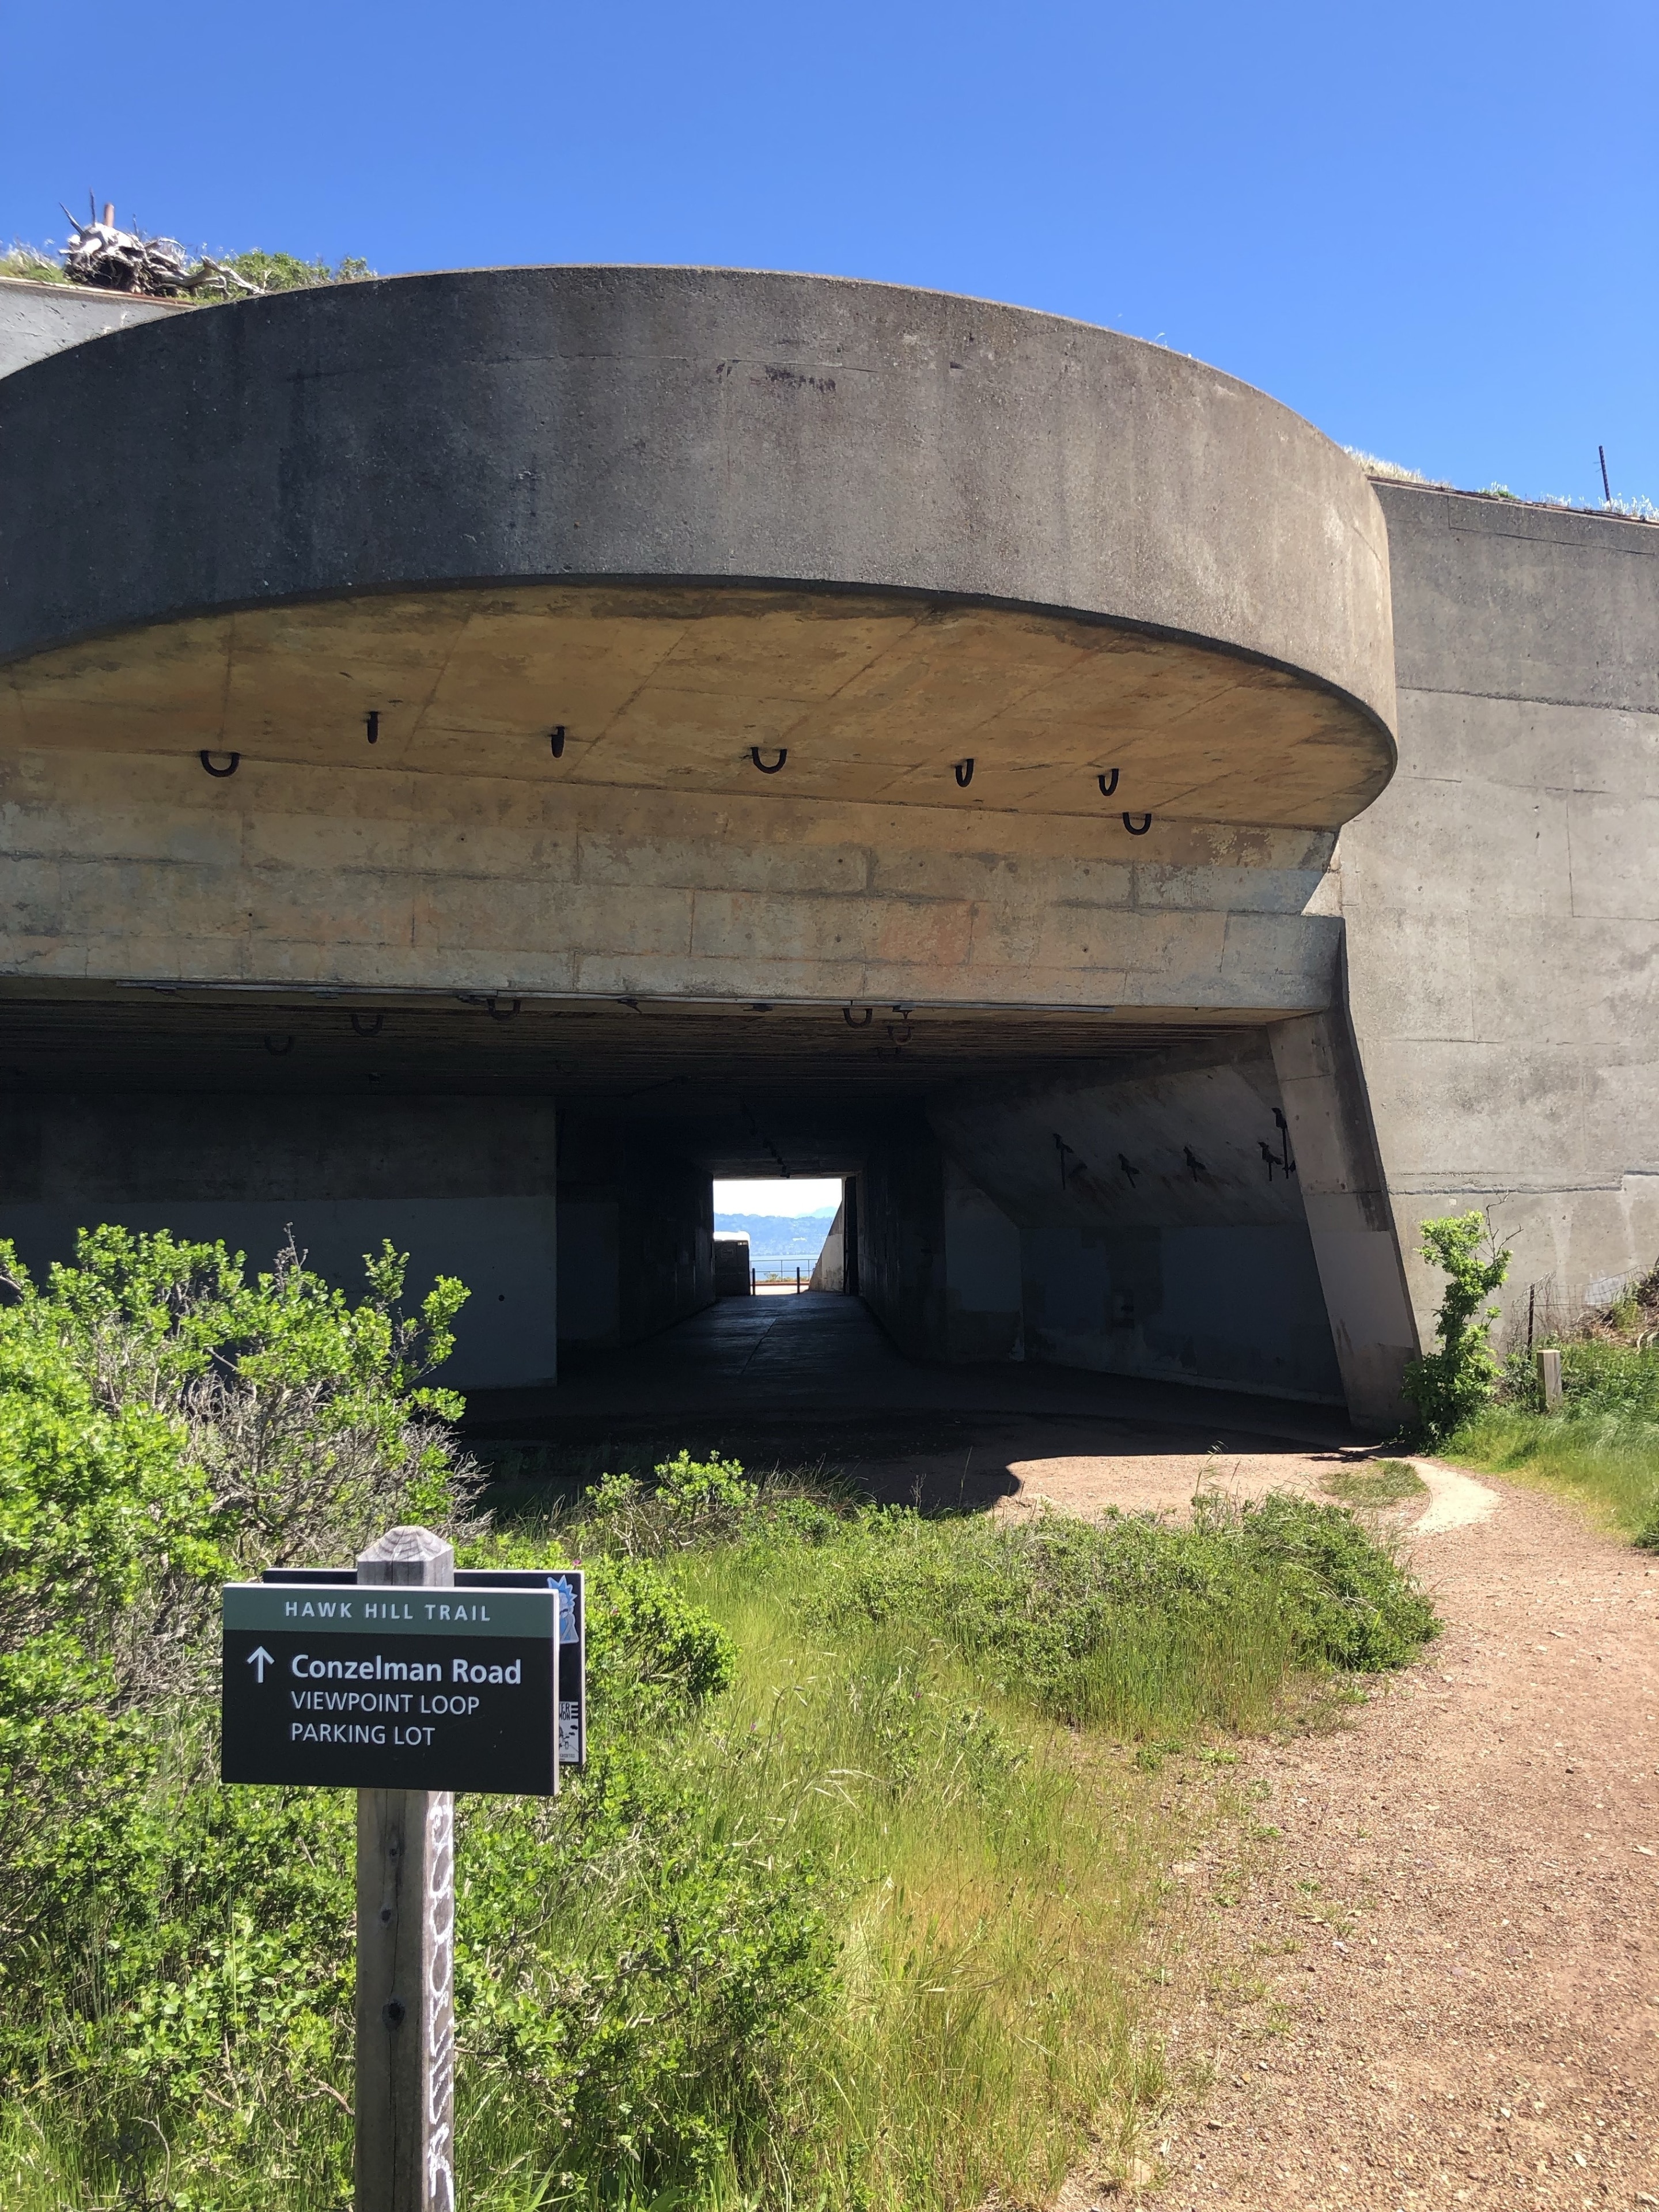 Remains of a gun battery that was built for the defense of San Francisco Bay during World War II. This area, located on the north side of the Golden Gate Bridge also has some of the best views of the bridge and City.